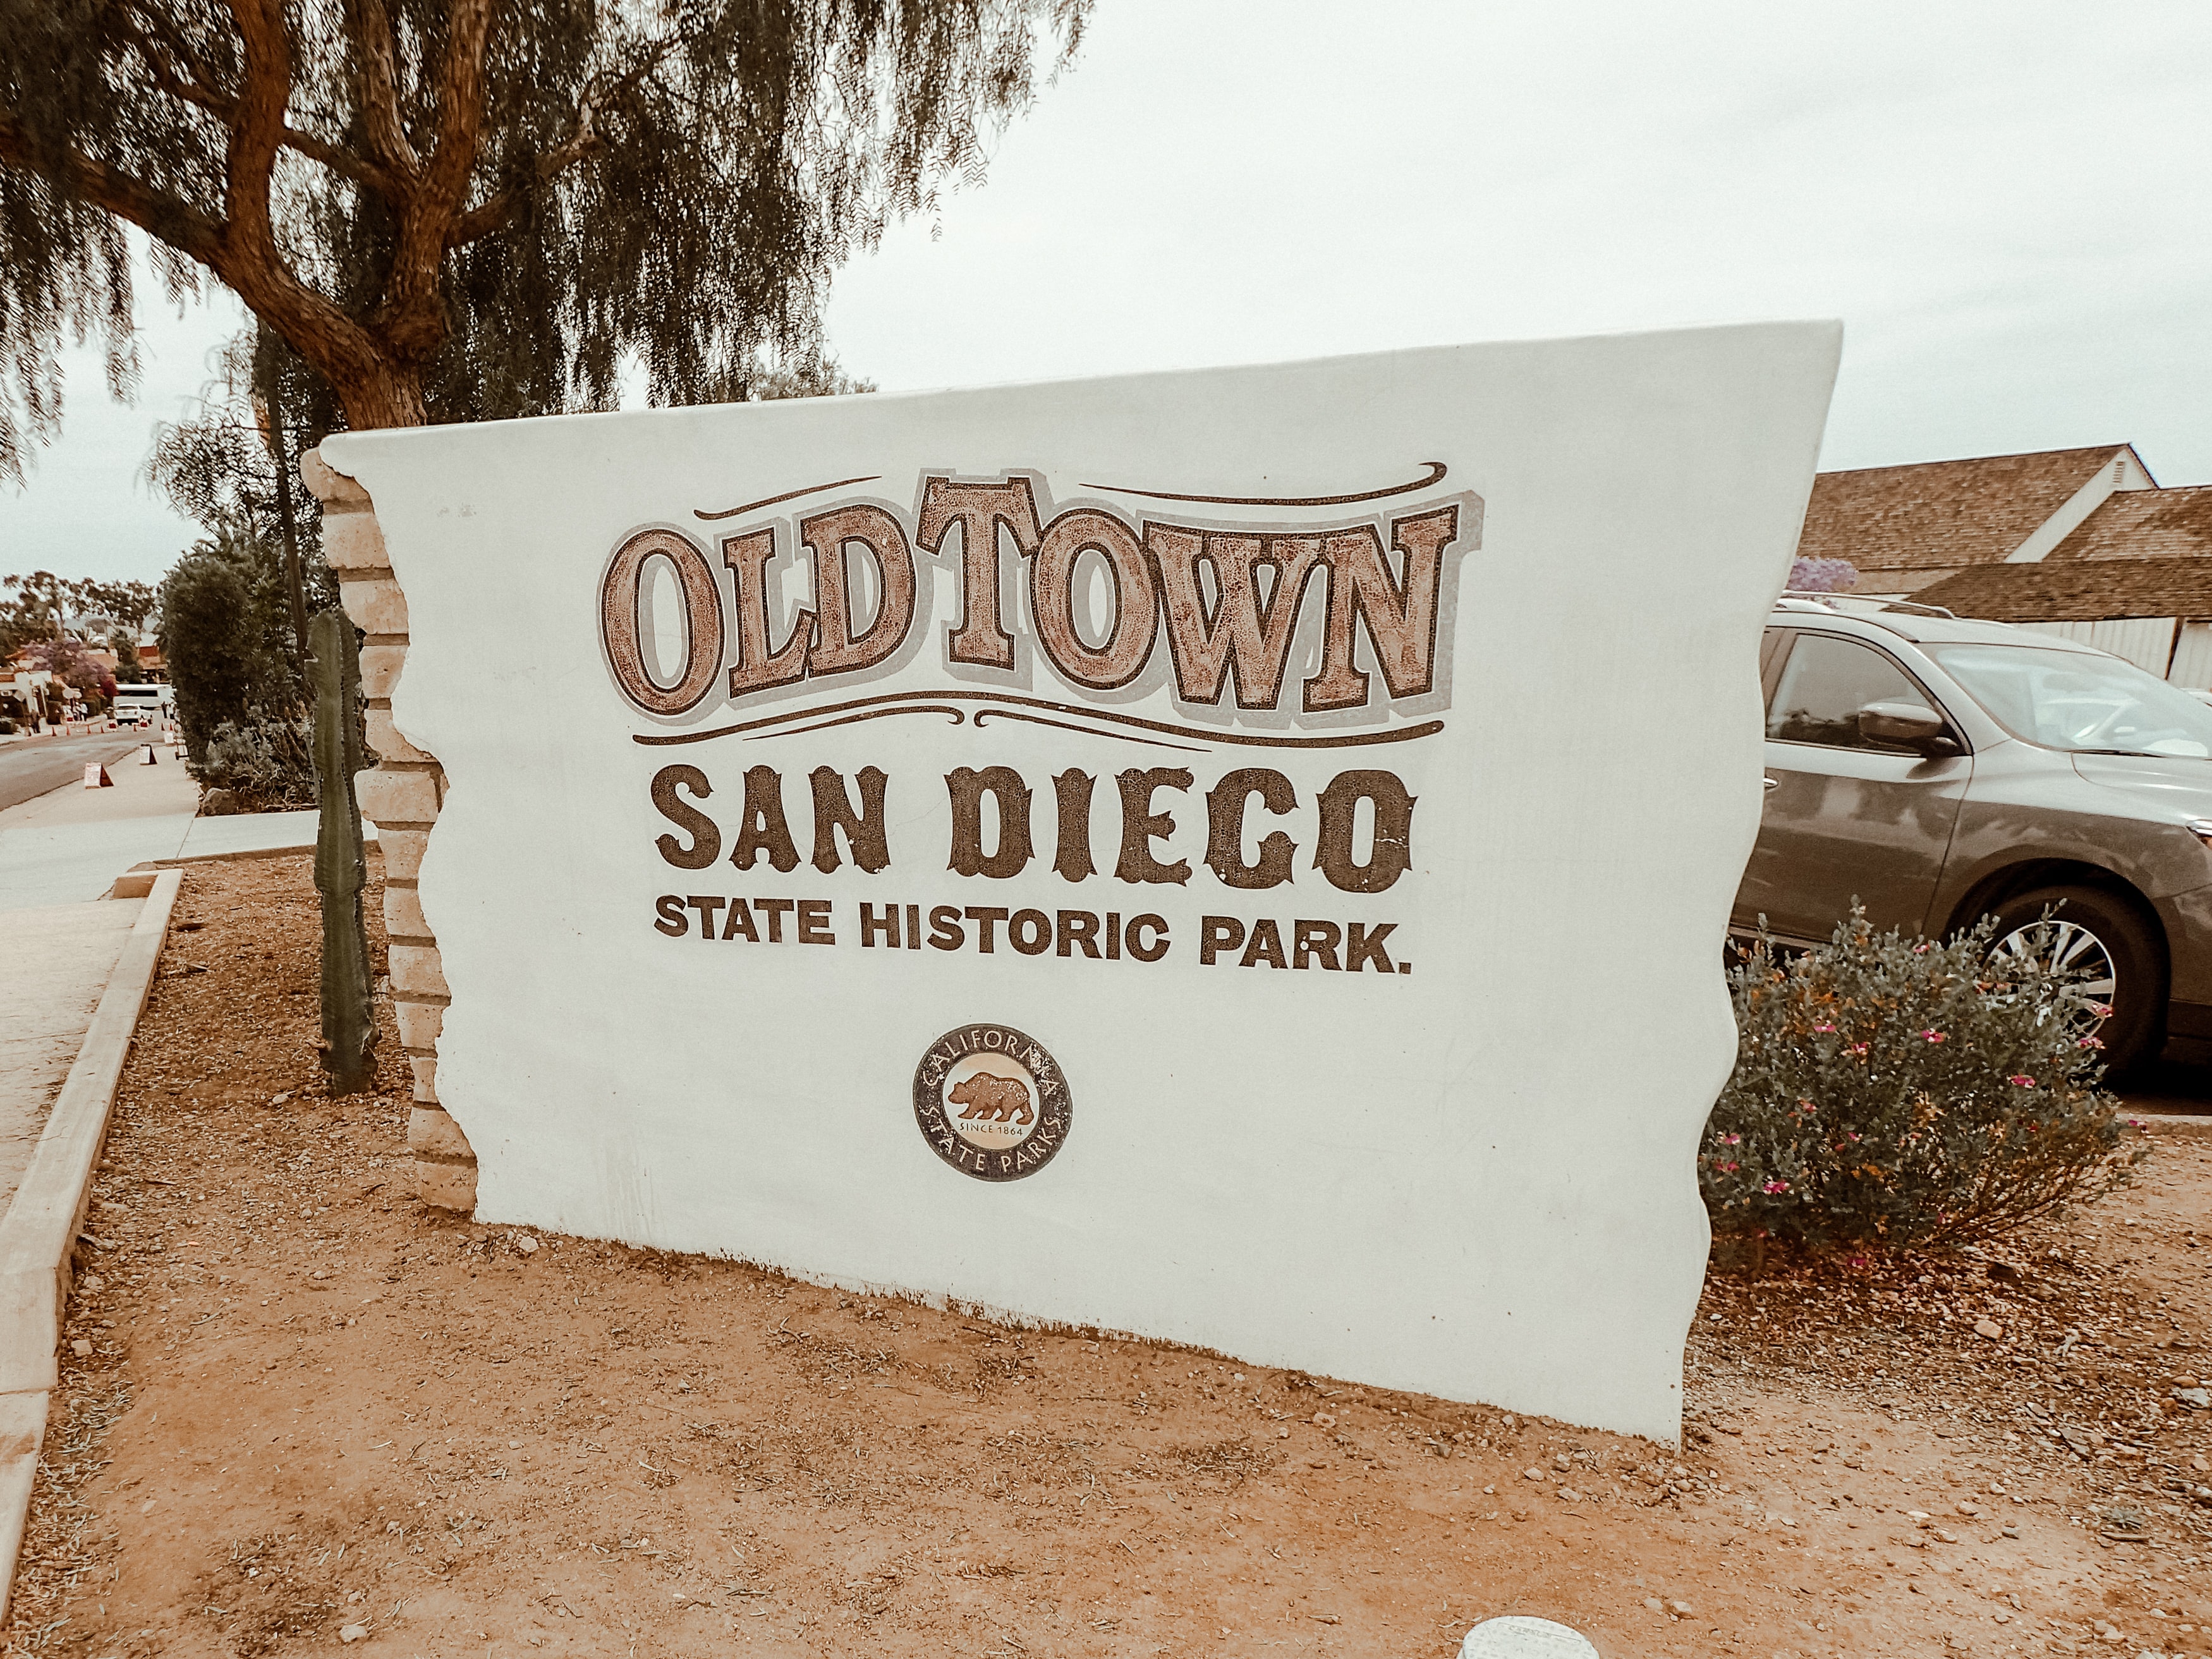 sign that says "old town San Diego"